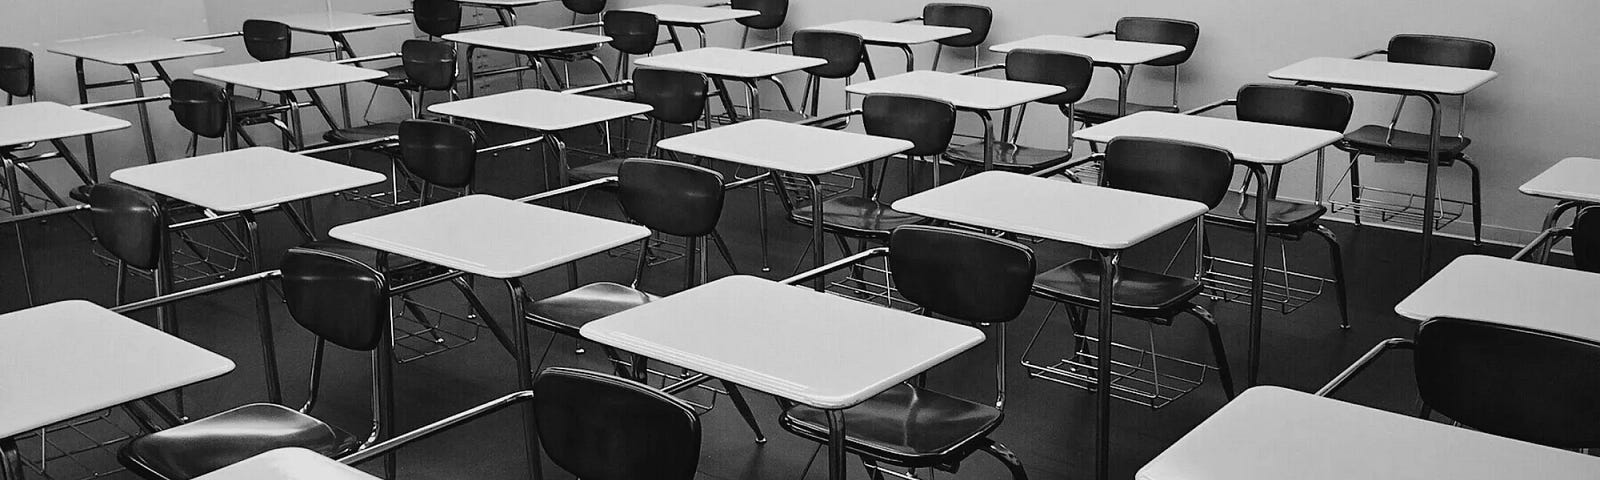 A black and white photograph showing a wide-angle view of a classroom full of student chairs with the wrap around desks.